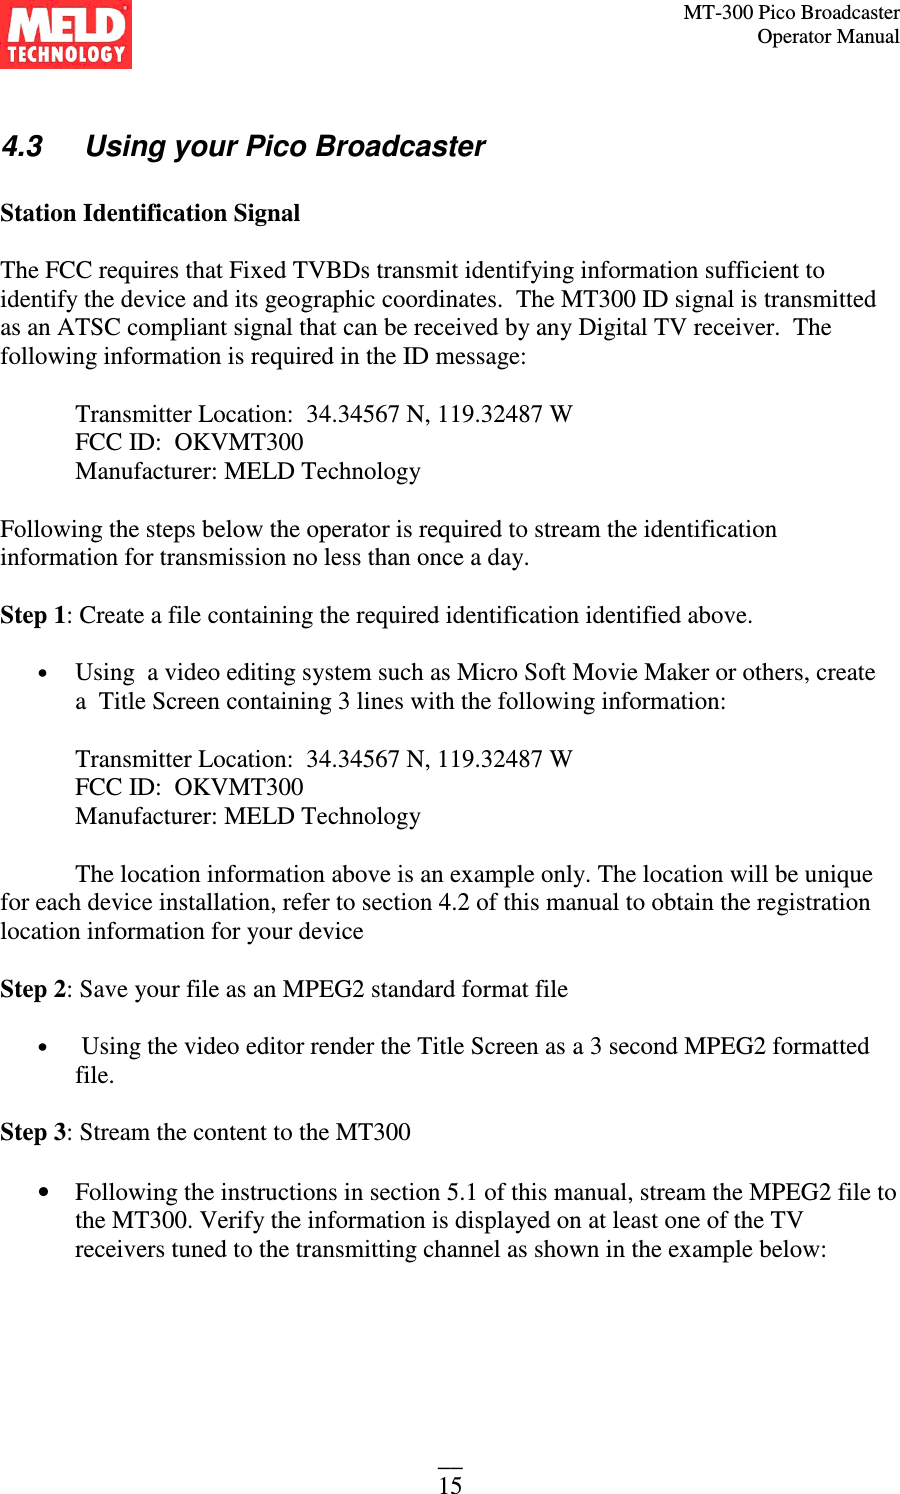 MT-300 Pico Broadcaster                                                                                                                                             Operator Manual __ 15  4.3   Using your Pico Broadcaster  Station Identification Signal  The FCC requires that Fixed TVBDs transmit identifying information sufficient to identify the device and its geographic coordinates.  The MT300 ID signal is transmitted as an ATSC compliant signal that can be received by any Digital TV receiver.  The following information is required in the ID message:    Transmitter Location:  34.34567 N, 119.32487 W FCC ID:  OKVMT300 Manufacturer: MELD Technology    Following the steps below the operator is required to stream the identification information for transmission no less than once a day.  Step 1: Create a file containing the required identification identified above.  • Using  a video editing system such as Micro Soft Movie Maker or others, create a  Title Screen containing 3 lines with the following information:  Transmitter Location:  34.34567 N, 119.32487 W  FCC ID:  OKVMT300  Manufacturer: MELD Technology      The location information above is an example only. The location will be unique for each device installation, refer to section 4.2 of this manual to obtain the registration location information for your device  Step 2: Save your file as an MPEG2 standard format file  •  Using the video editor render the Title Screen as a 3 second MPEG2 formatted file.  Step 3: Stream the content to the MT300  • Following the instructions in section 5.1 of this manual, stream the MPEG2 file to the MT300. Verify the information is displayed on at least one of the TV receivers tuned to the transmitting channel as shown in the example below:  